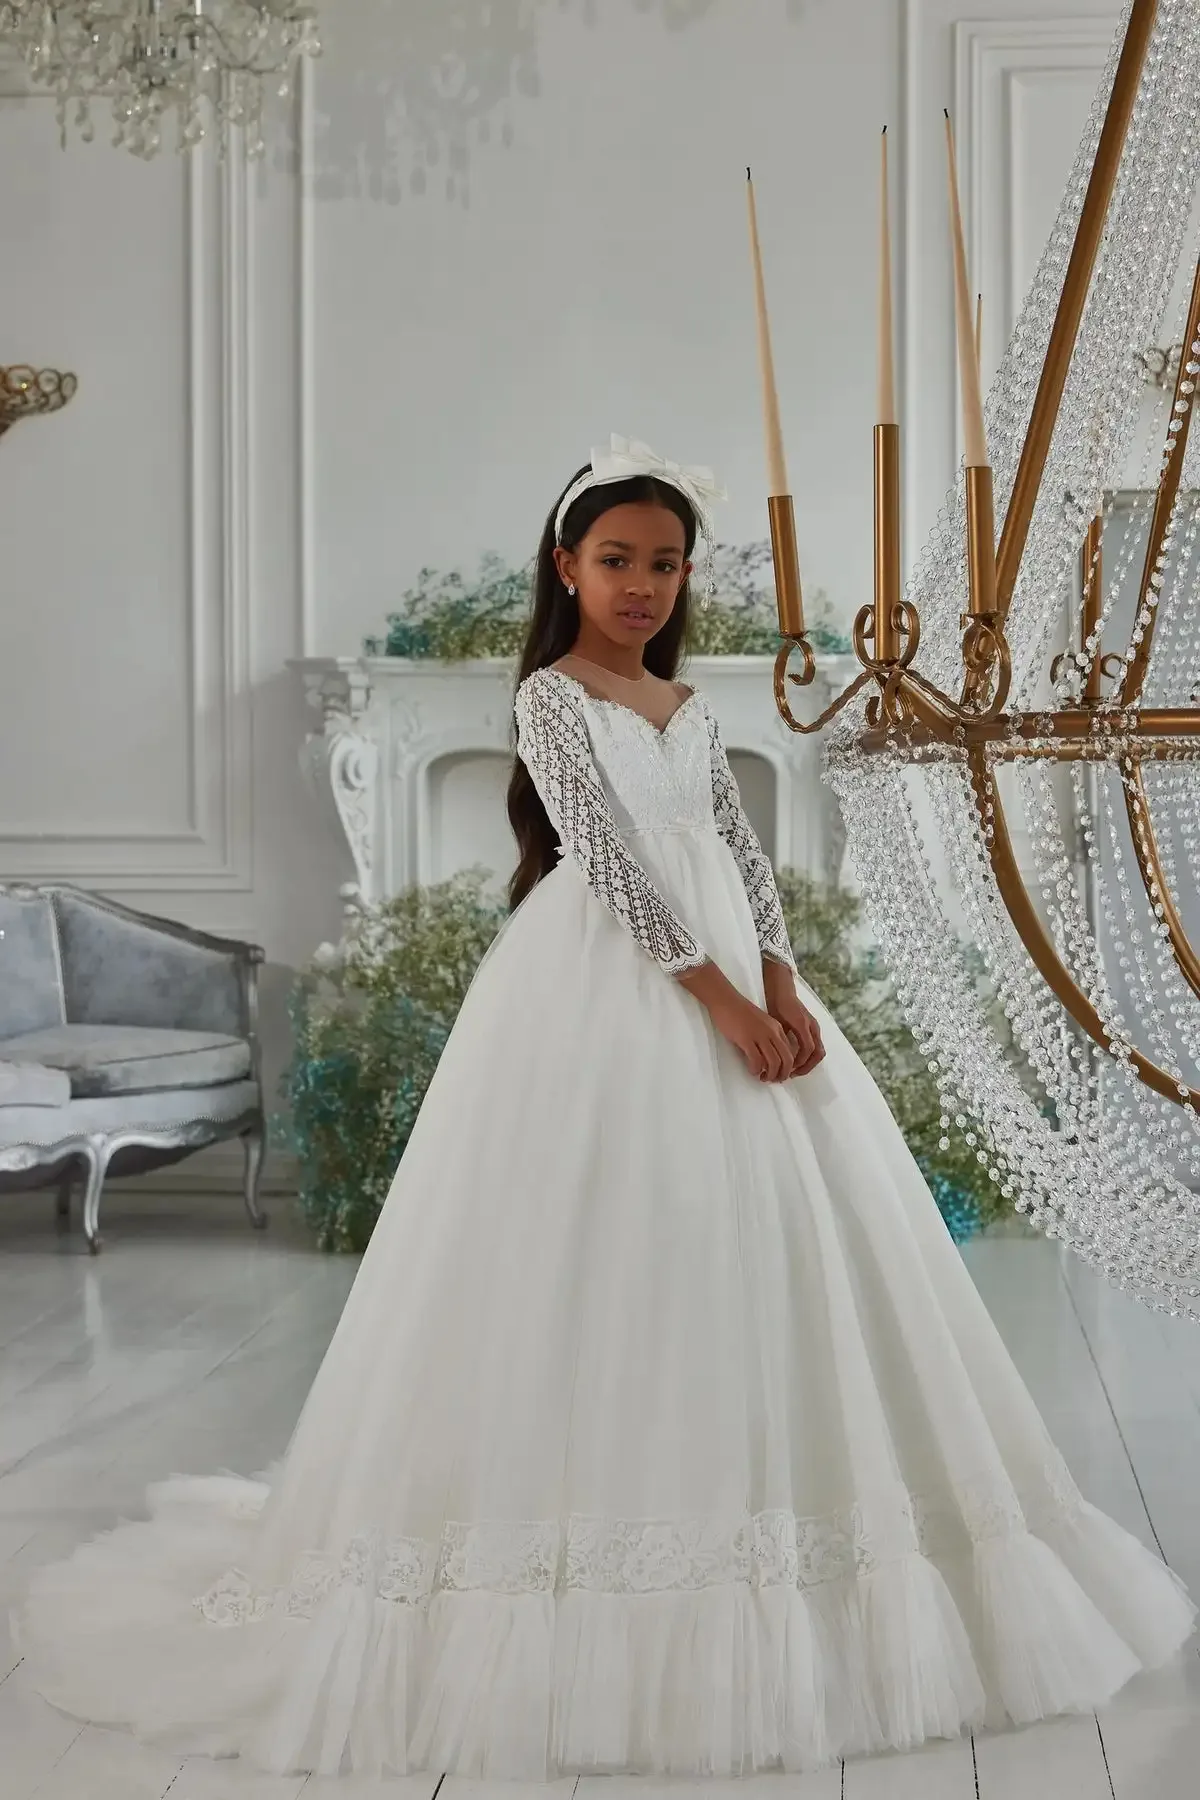 

Long Sleeve White Ivory Flower Girl Dresses High Neck for Wedding Guest Kids Bridesmaid Dress Lace Satin First Communion